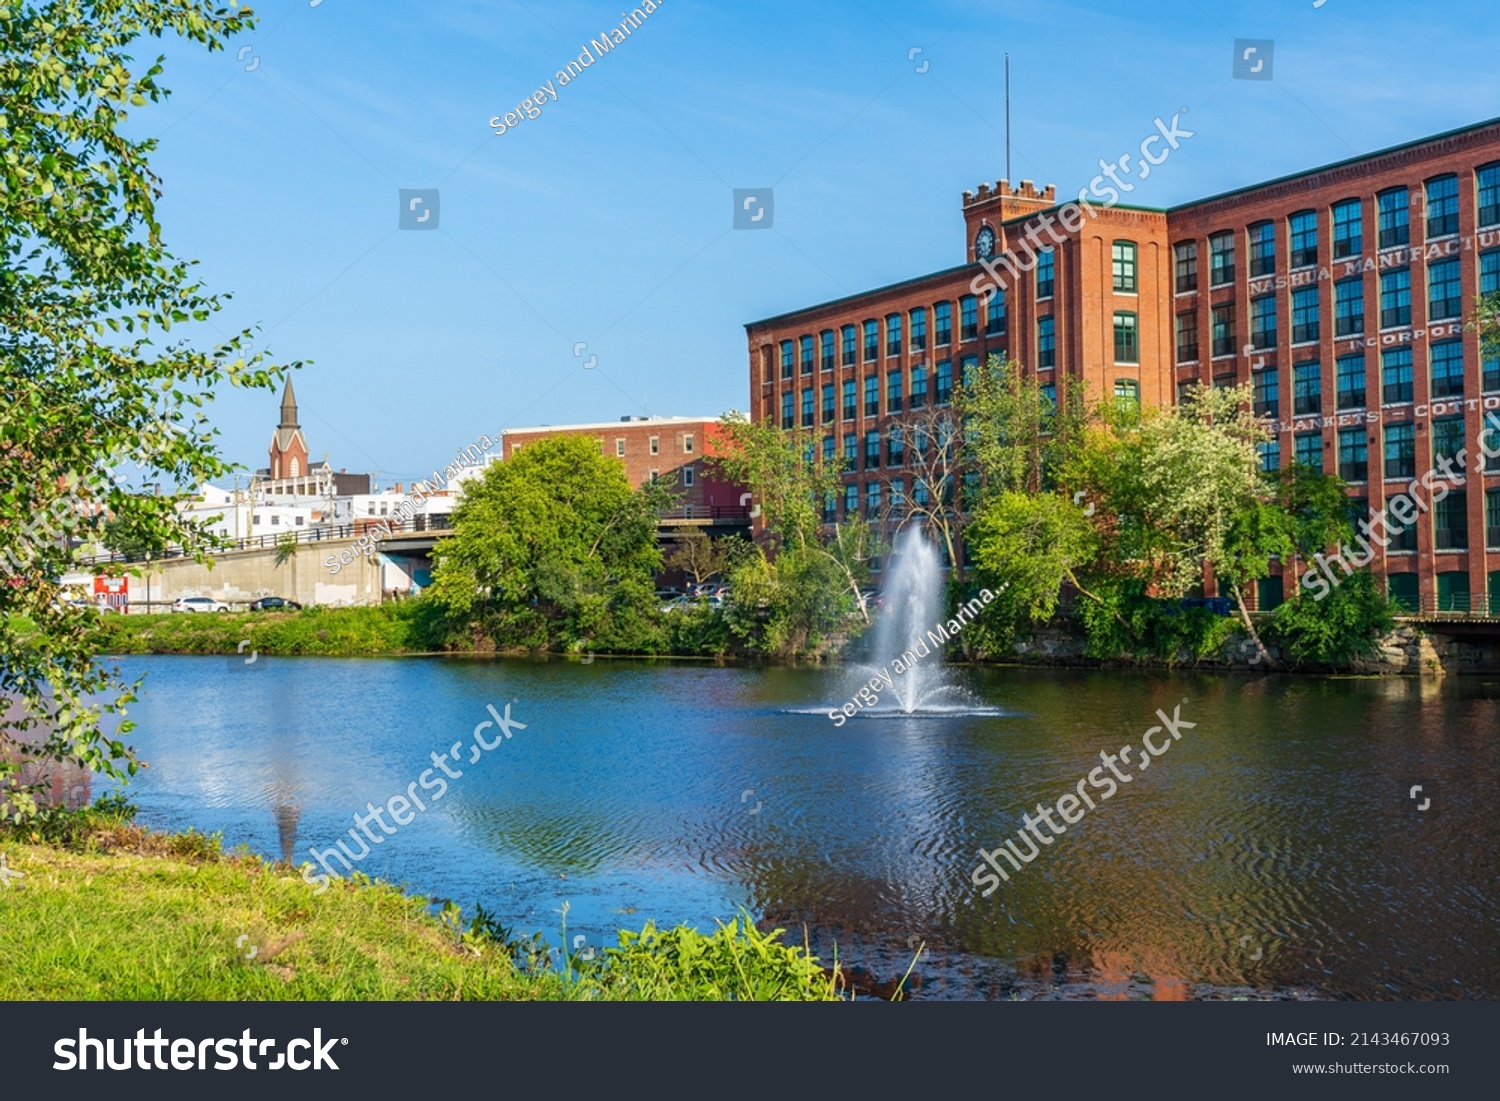 Fountain on the Nashua River against the background of a historic cotton factory building with a clock tower in the old industrial park of Nashua. New Hampshire, USA #2143467093